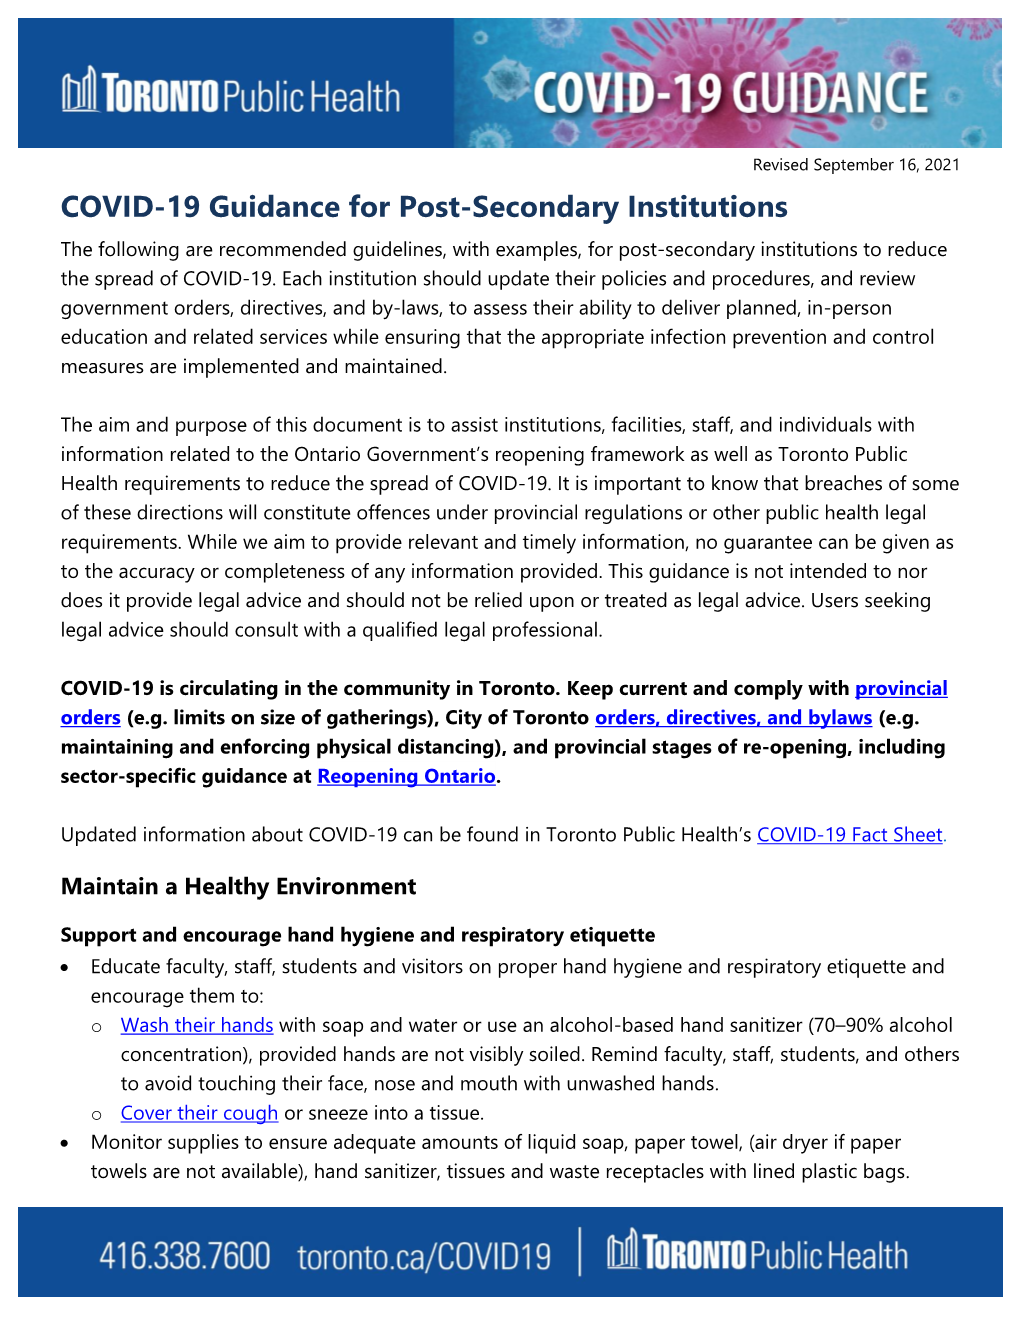 COVID-19 Guidance for Post-Secondary Institutions